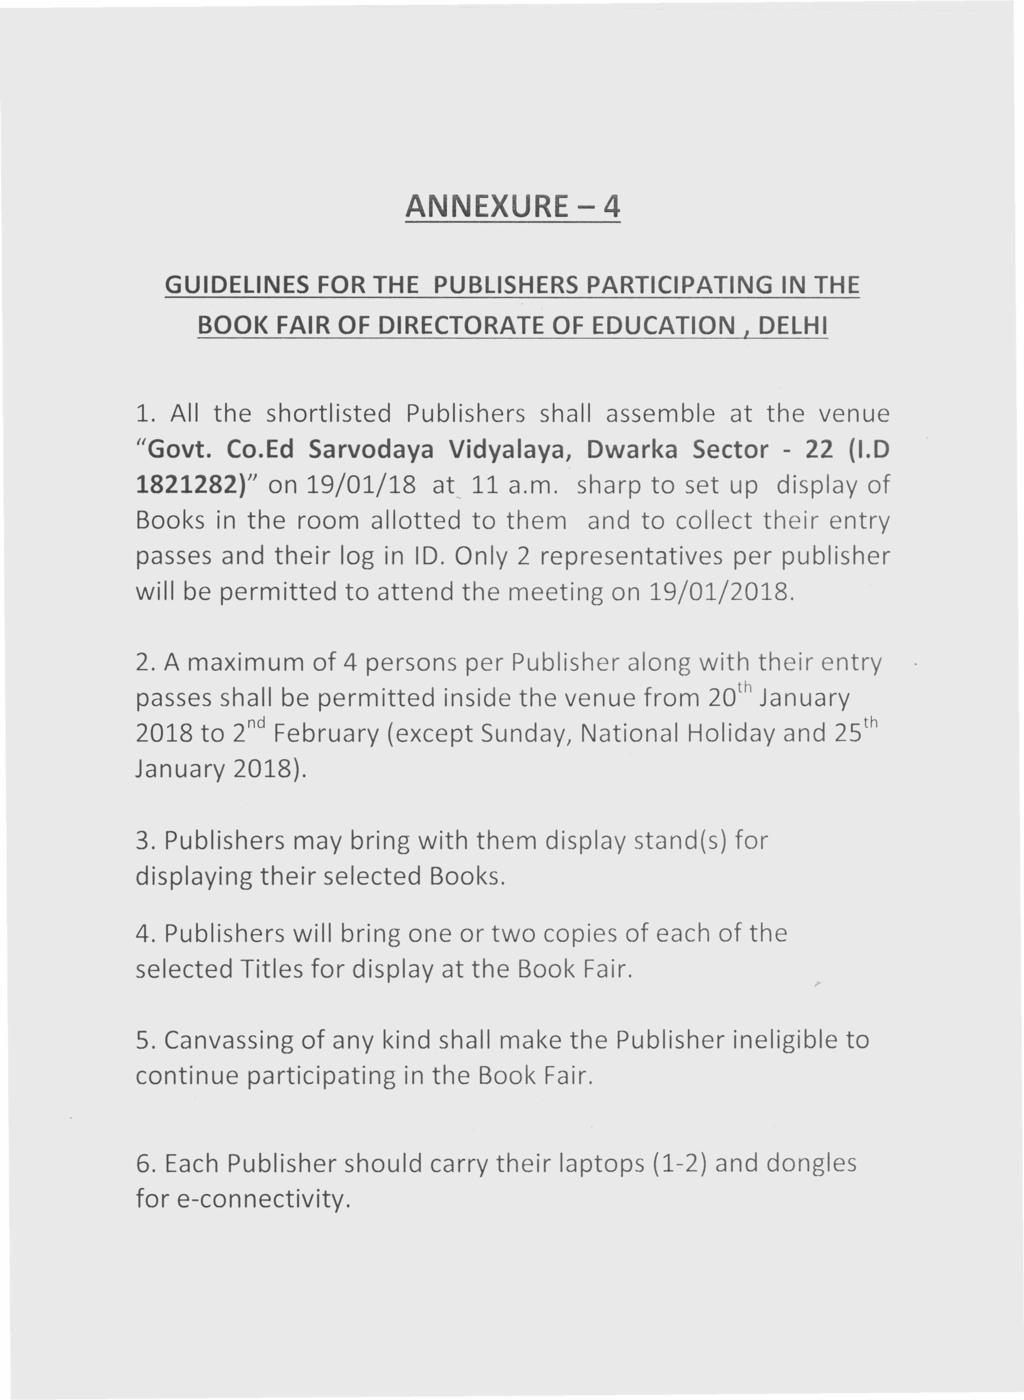 ANNEXURE - 4 GUIDELINES FOR THE PUBLISHERS PARTICIPATING IN THE BOOK FAIR OF DIRECTORATE OF EDUCATION, DELHI 1. All the shortlisted Publishers shall assemble at the venue "Govt. Co.